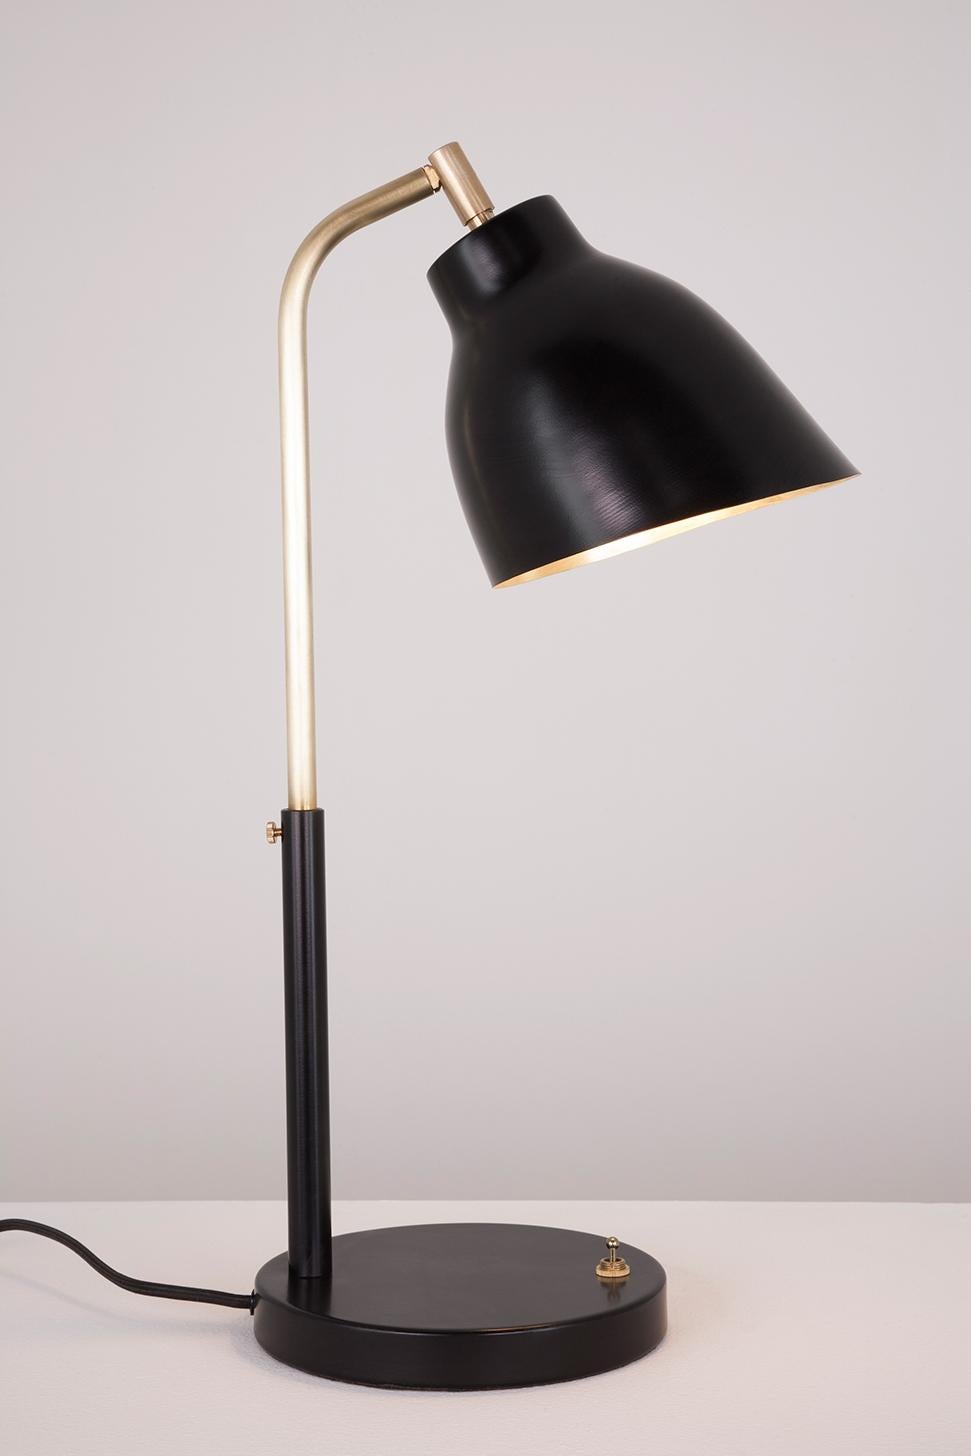 Powder-Coated Navire Table Lamp with Adjustable Solid Brass Arm and Powder Coat Tilting Shade